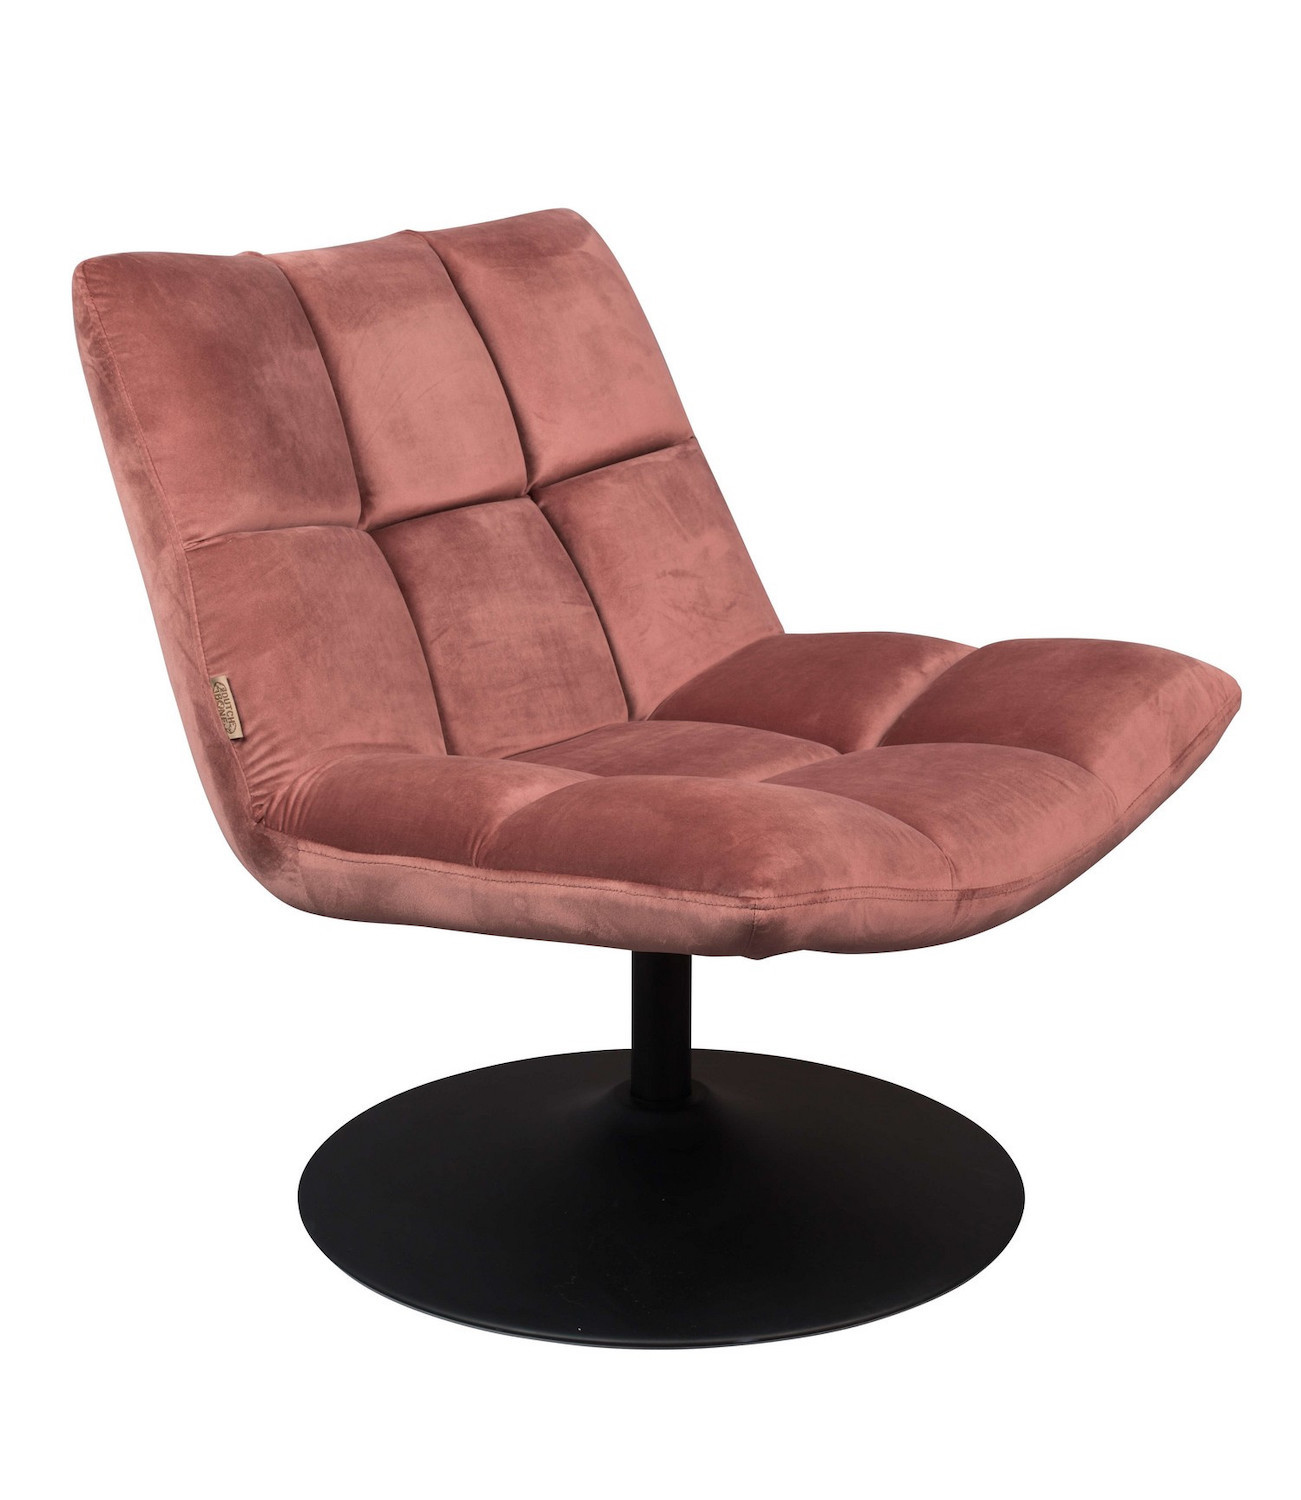 Fauteuil rose chair